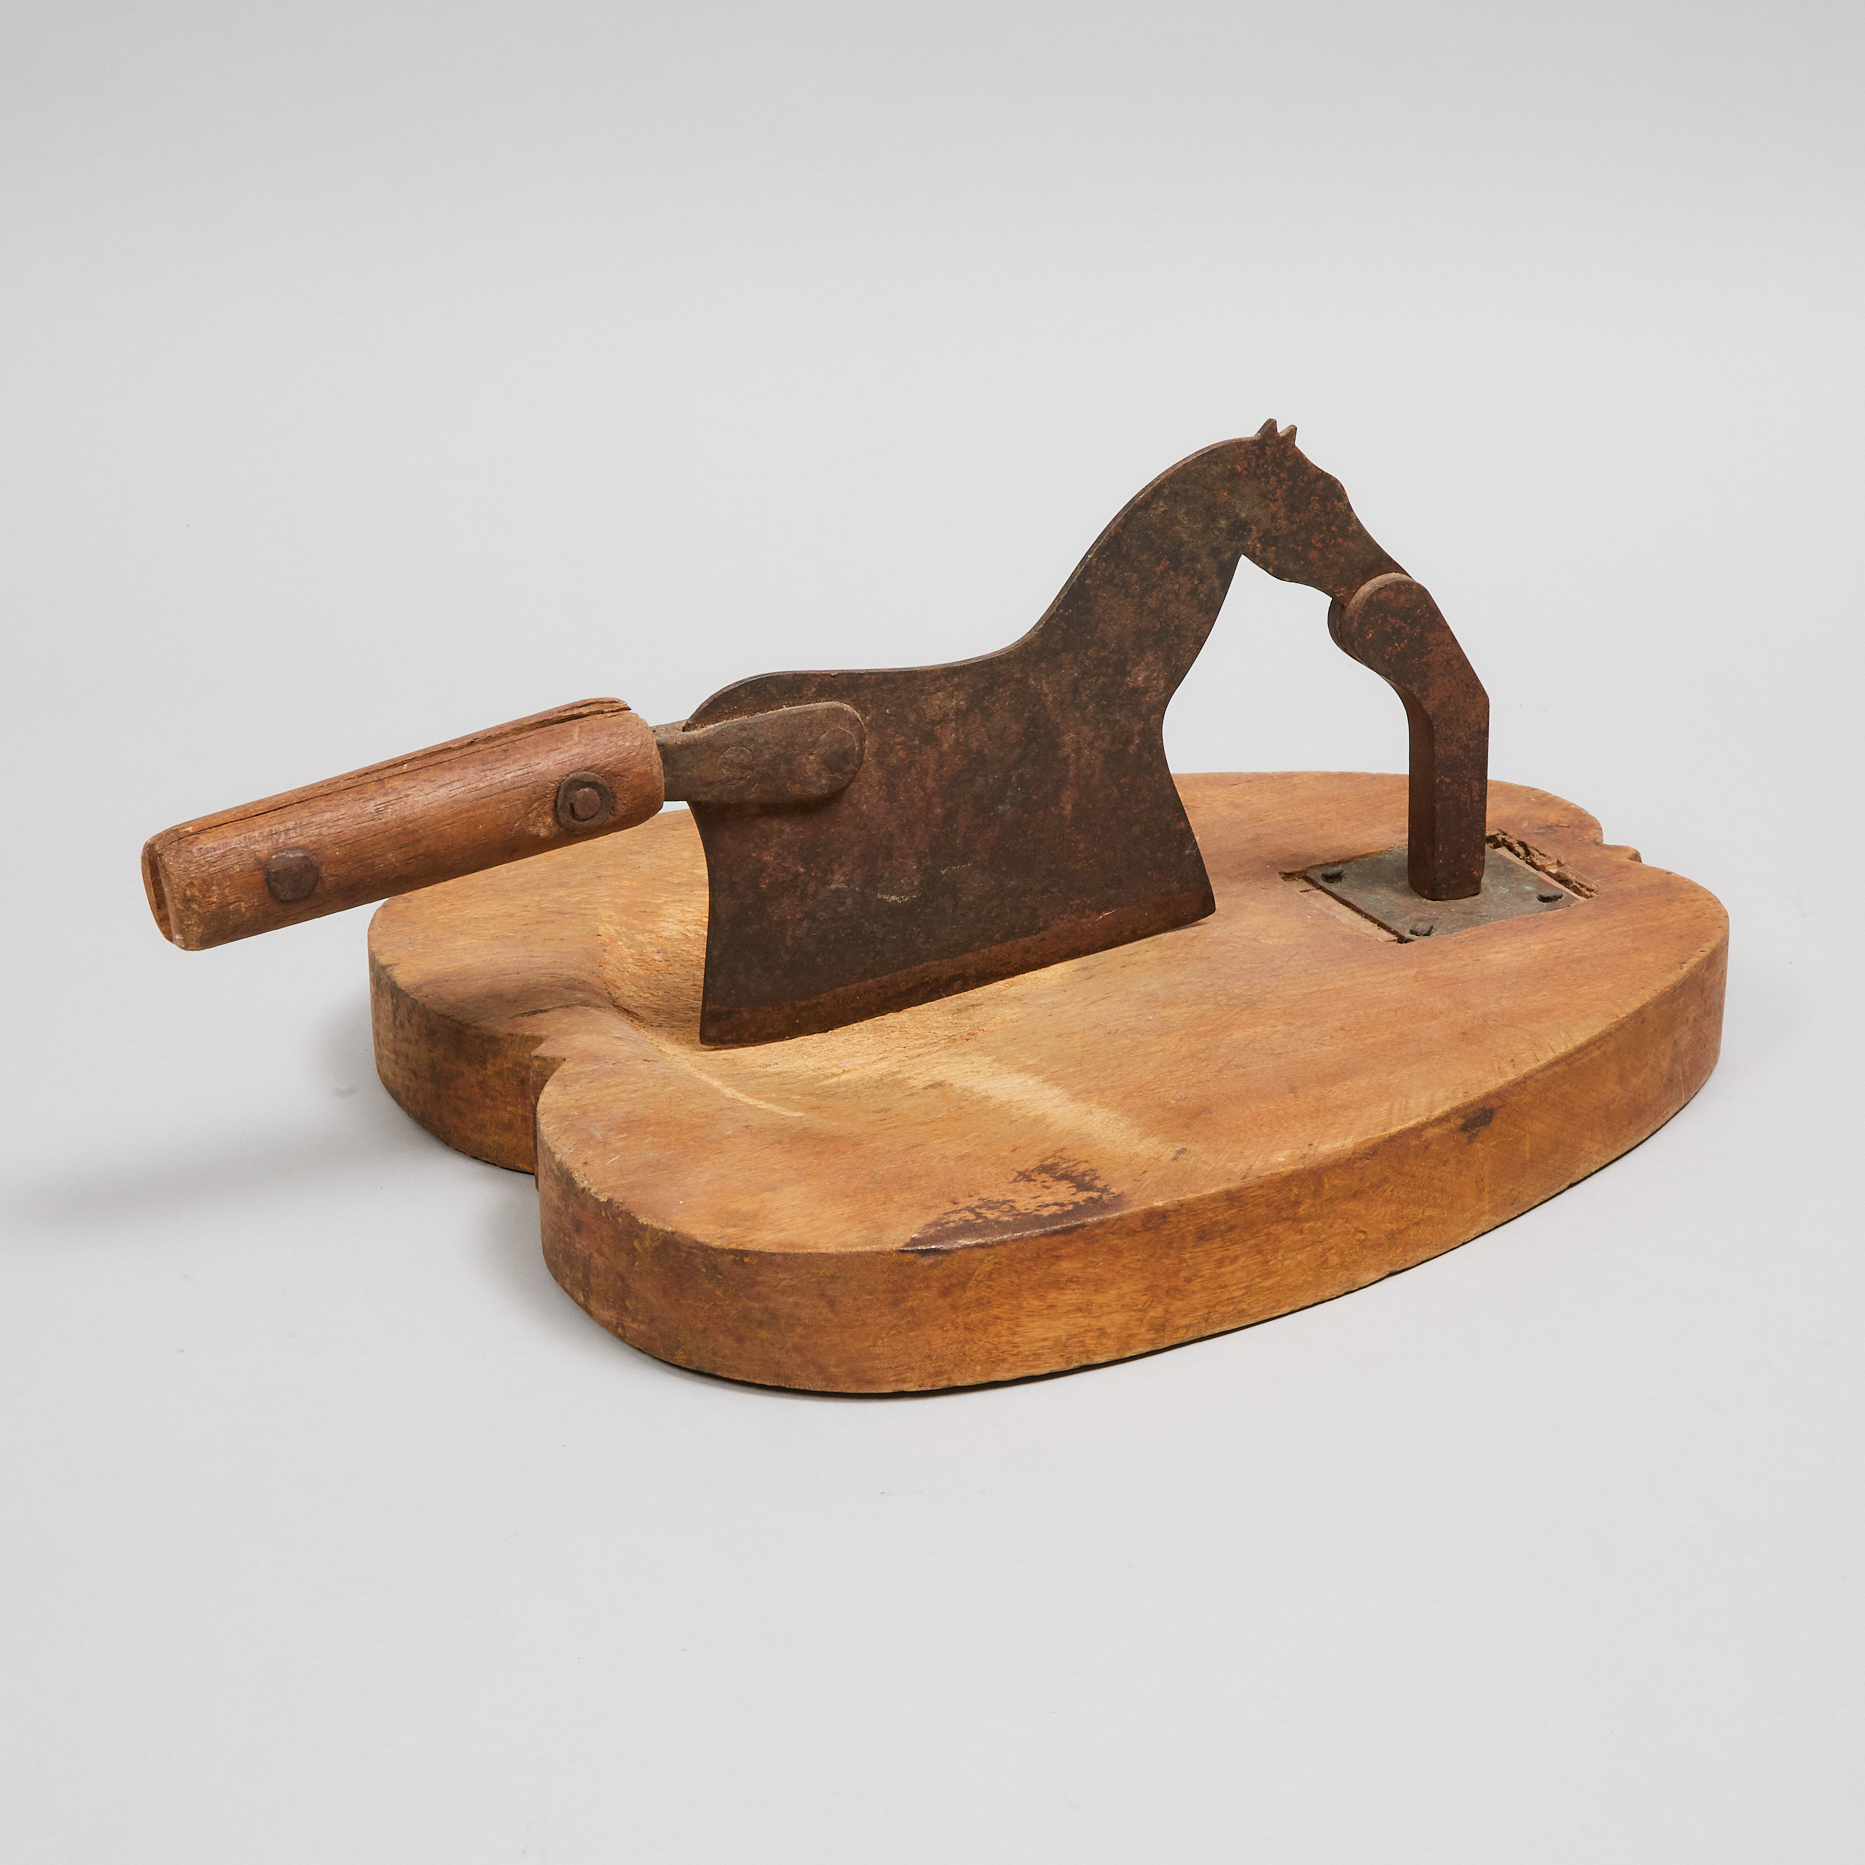 Quebec Horse Form Tobacco Cutter, 19th century